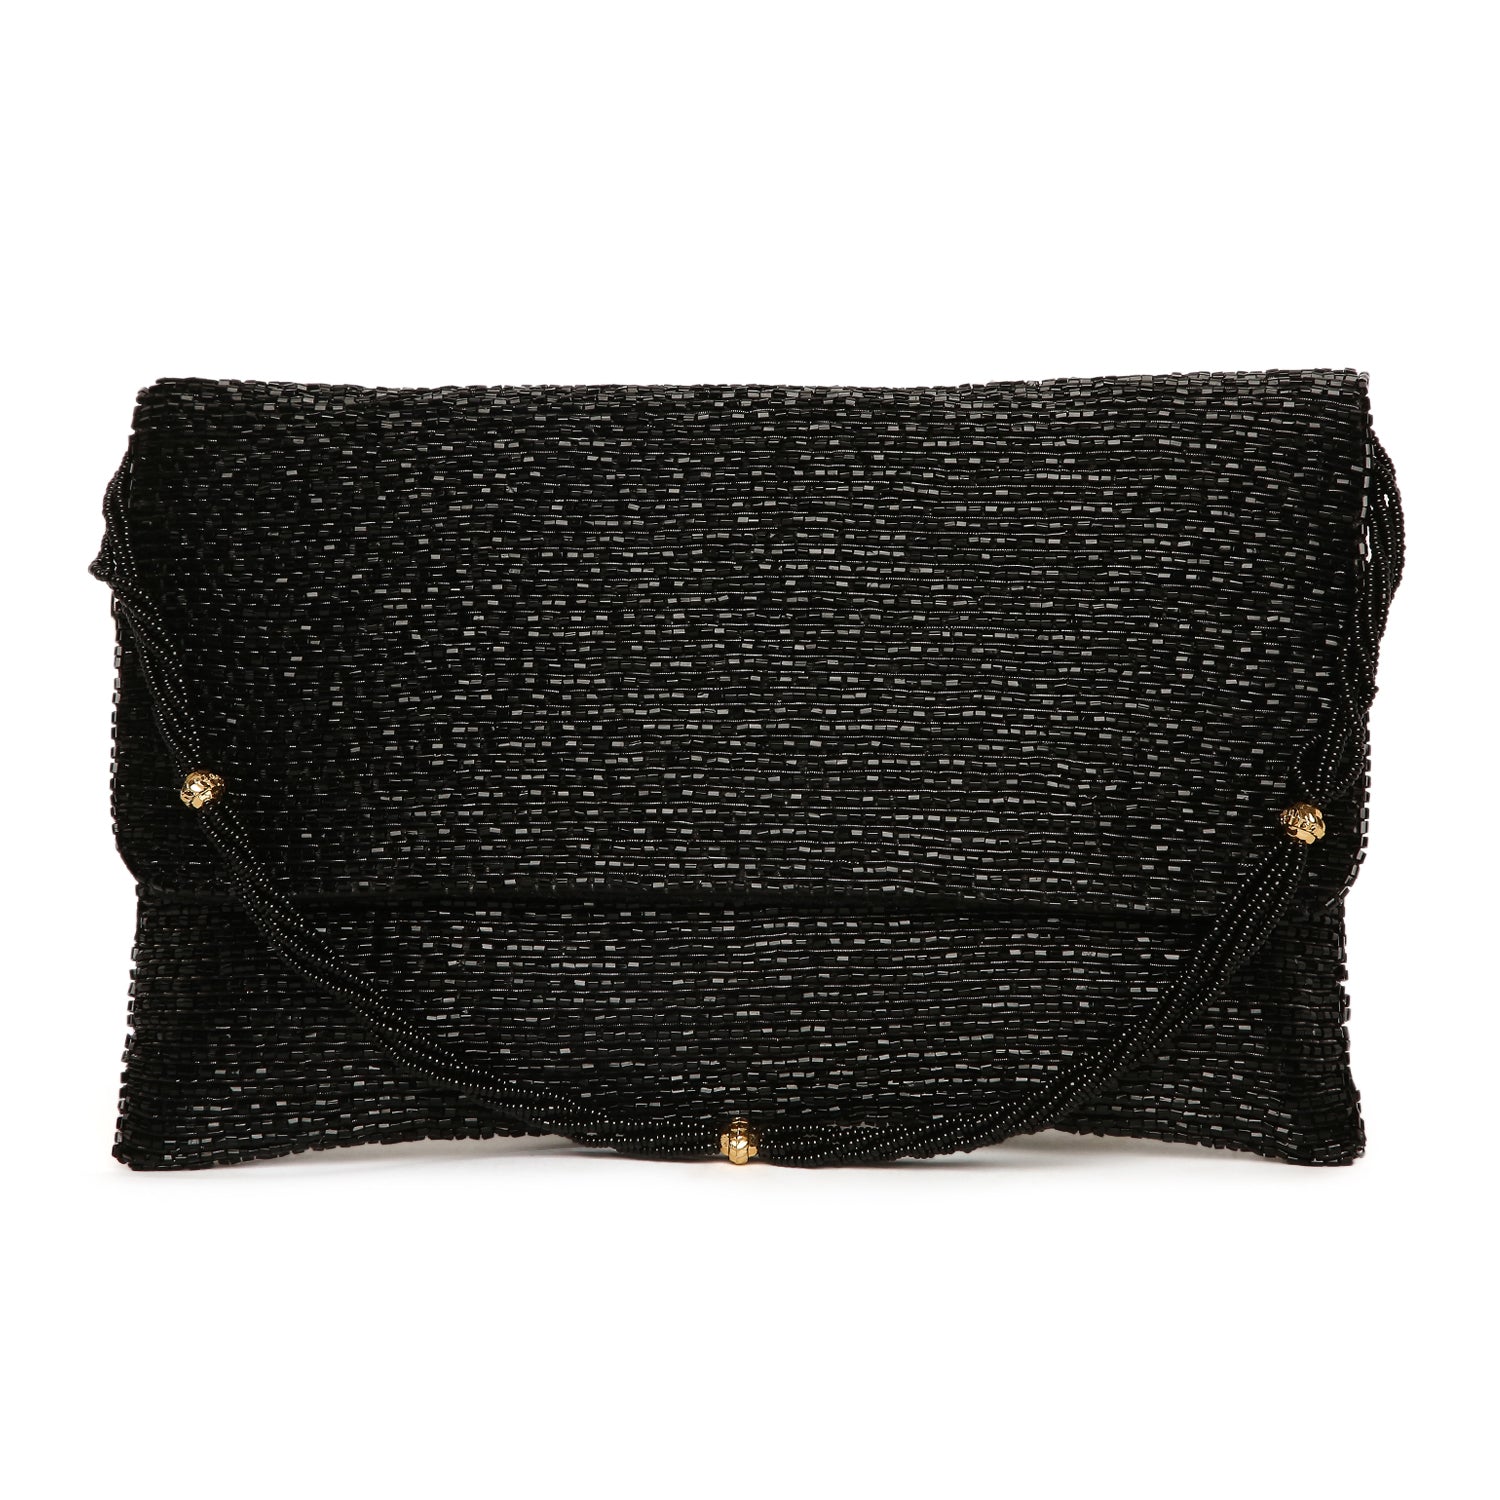 Faux Leather Clutch purse in Black with Chain - Beyond Bags